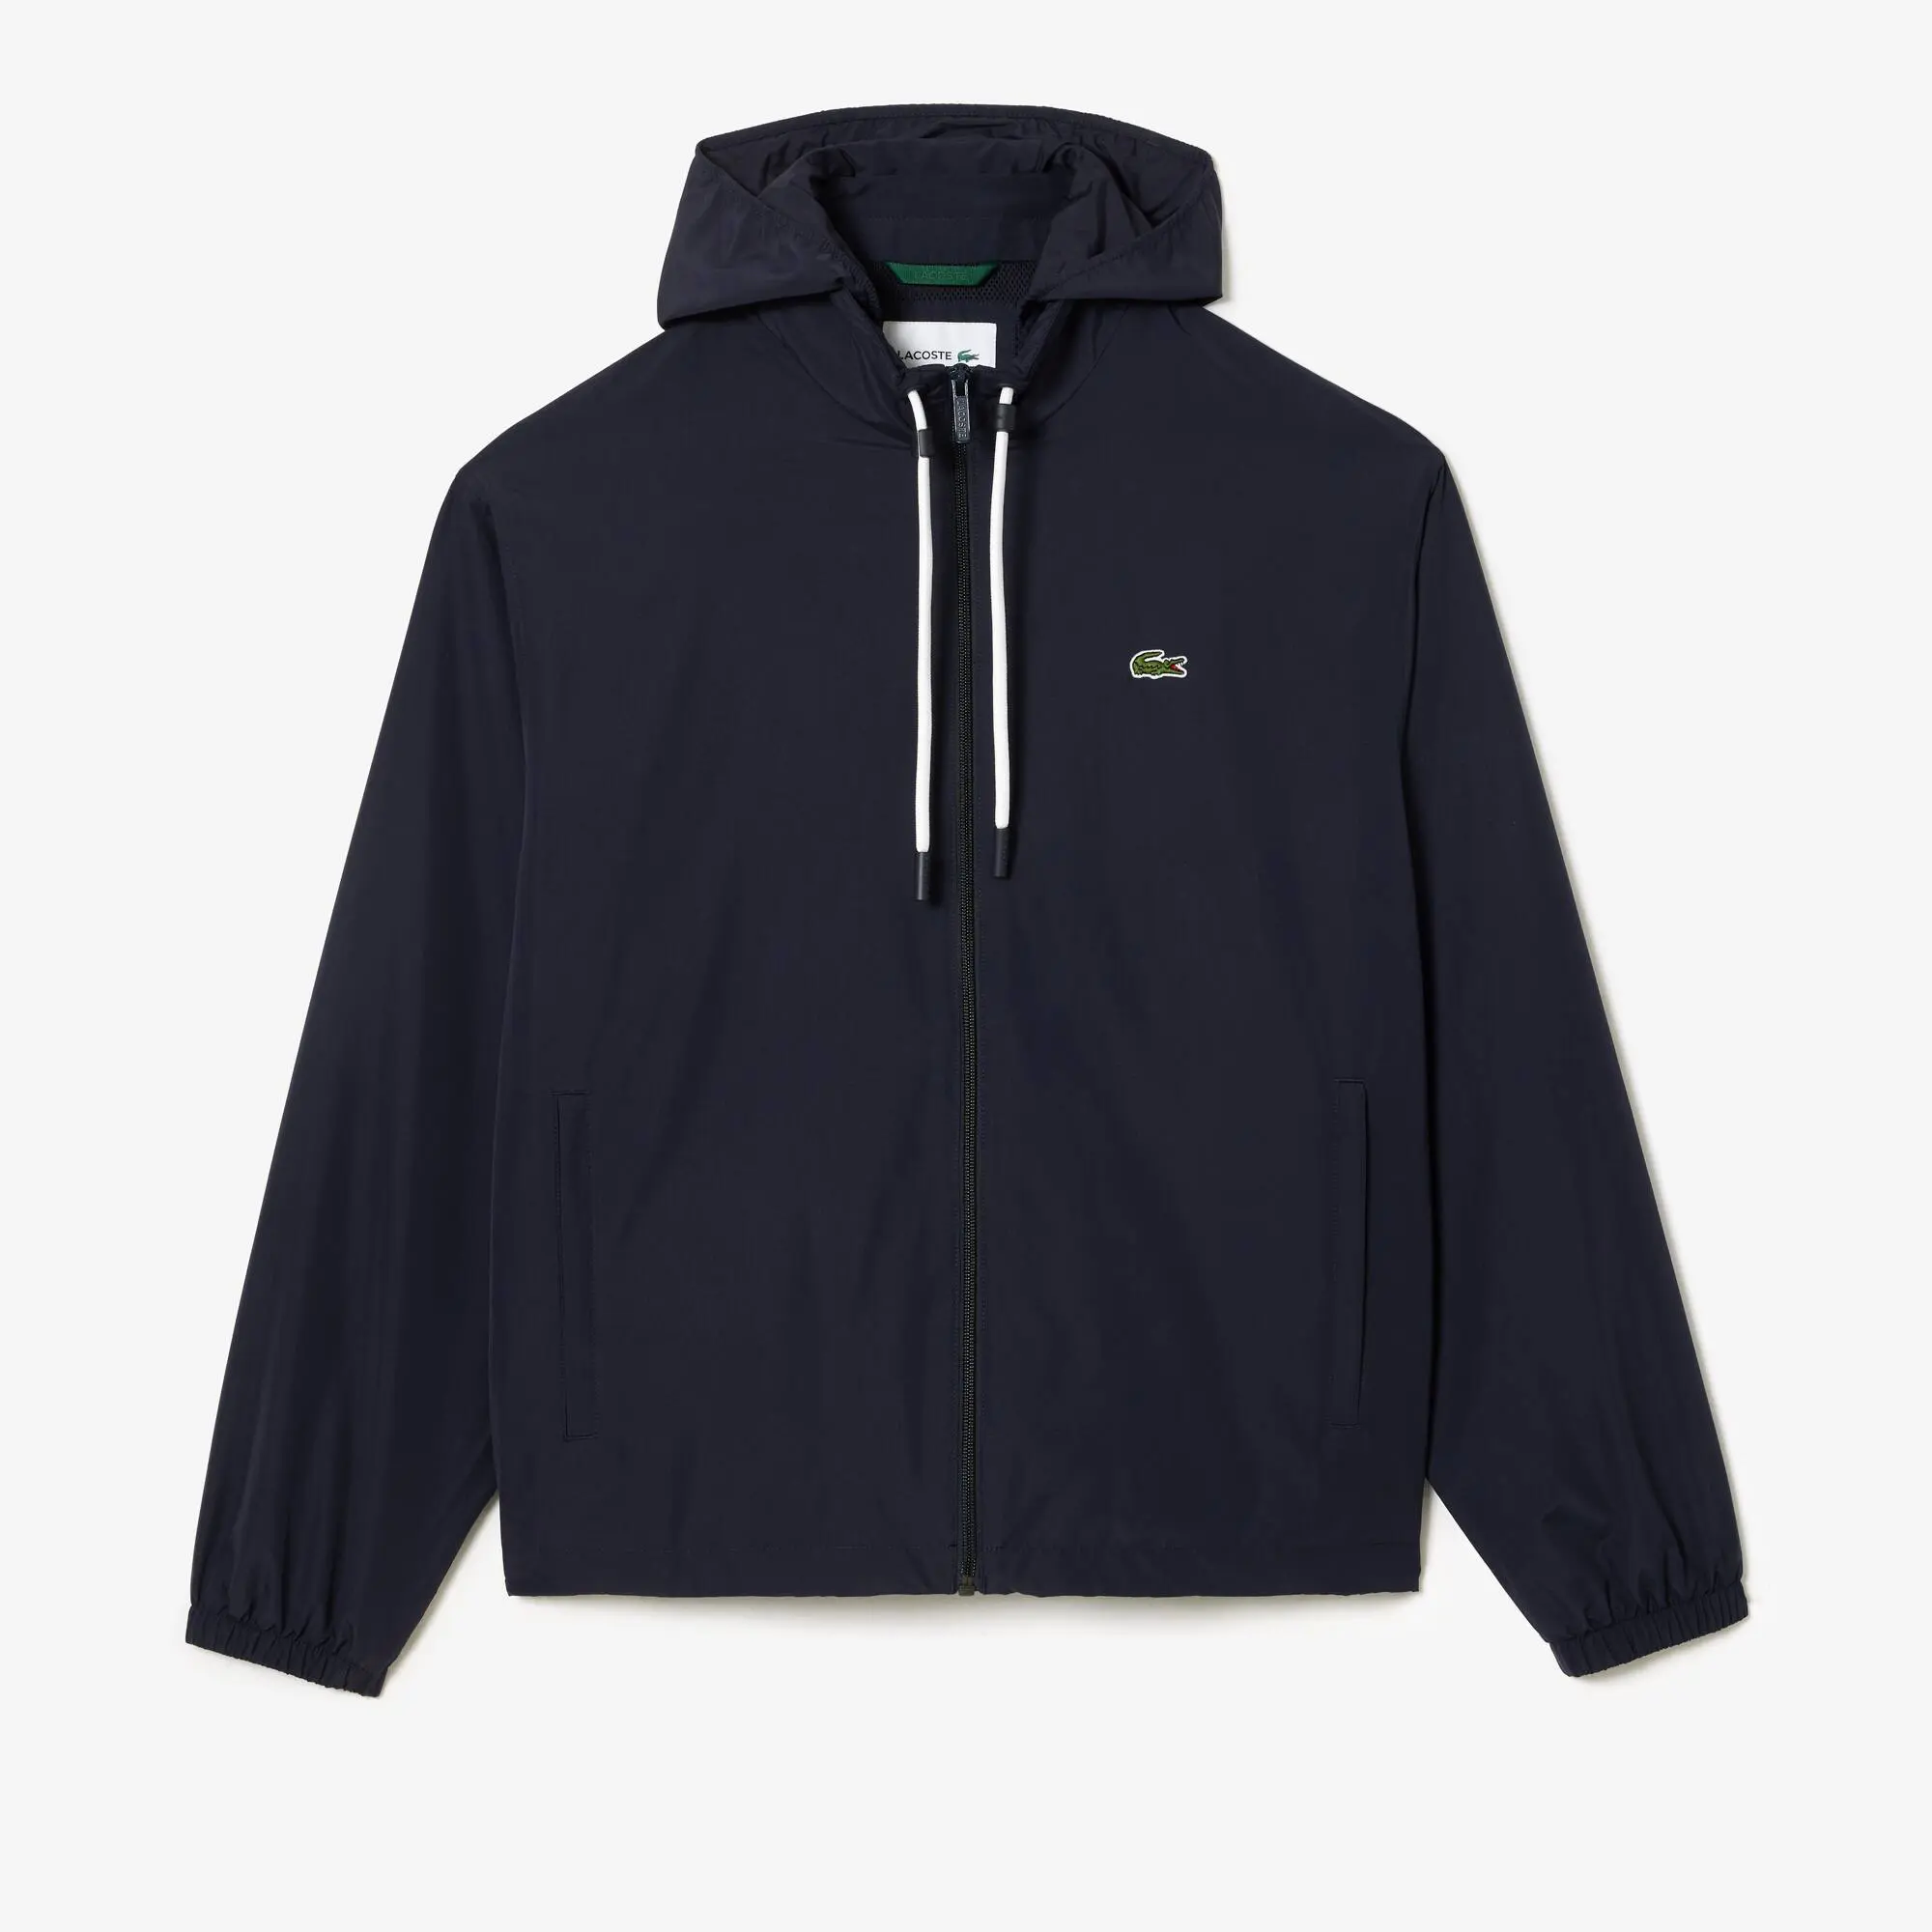 Lacoste Short Water-resistant Sportsuit Jacket with Removable Hood. 2